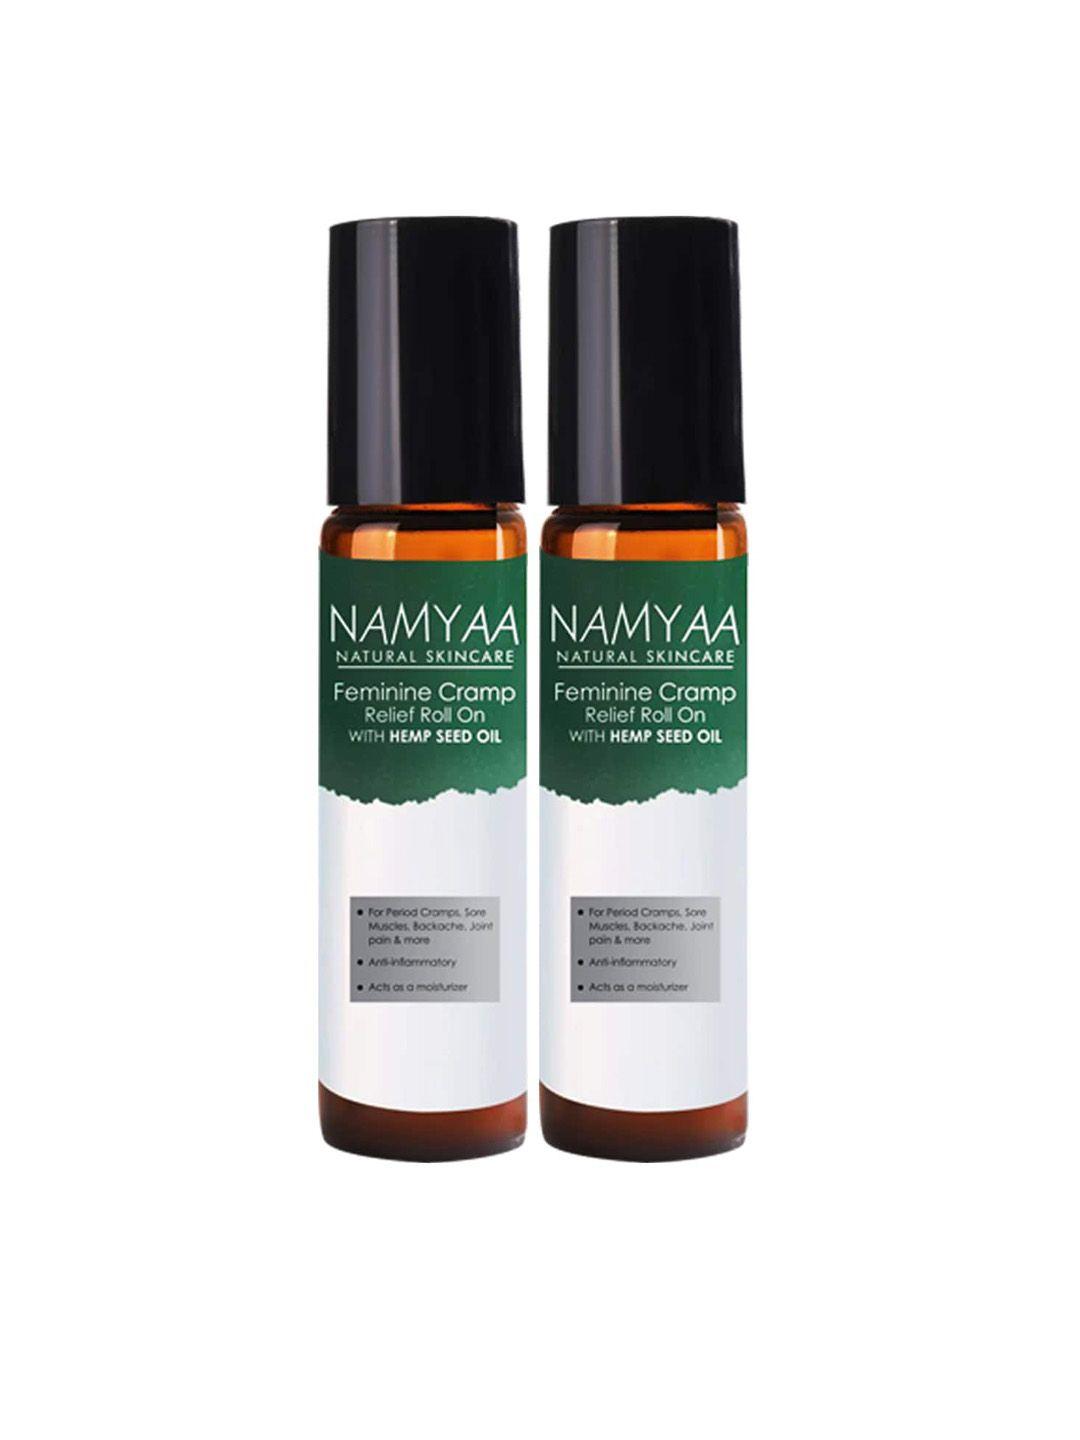 namyaa set of 2 cramp relief roll on with hemp seed oil - 20 ml each